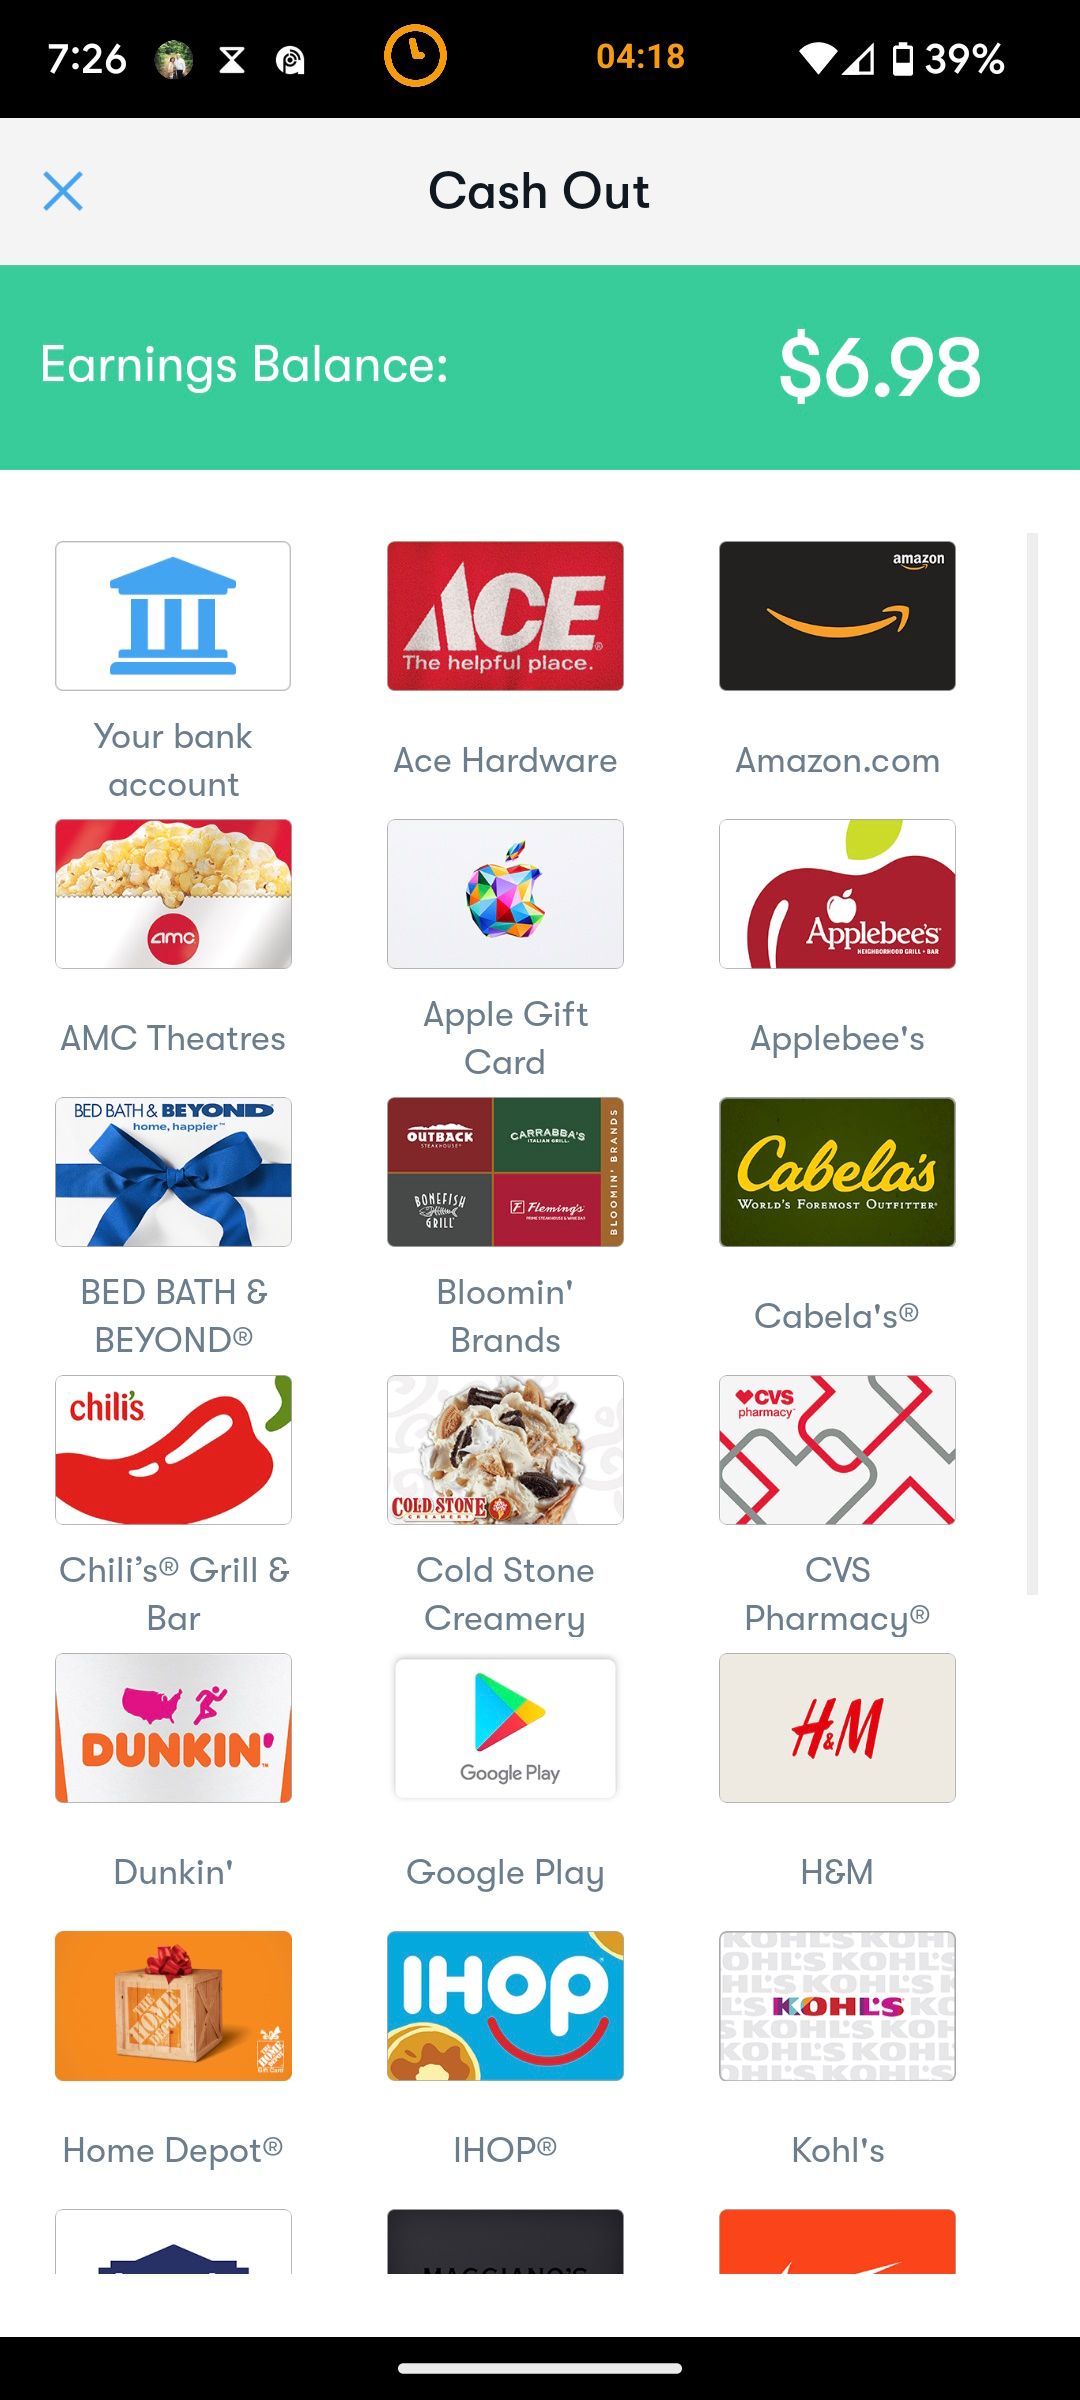 Different gift cards options for cashing out in Upside